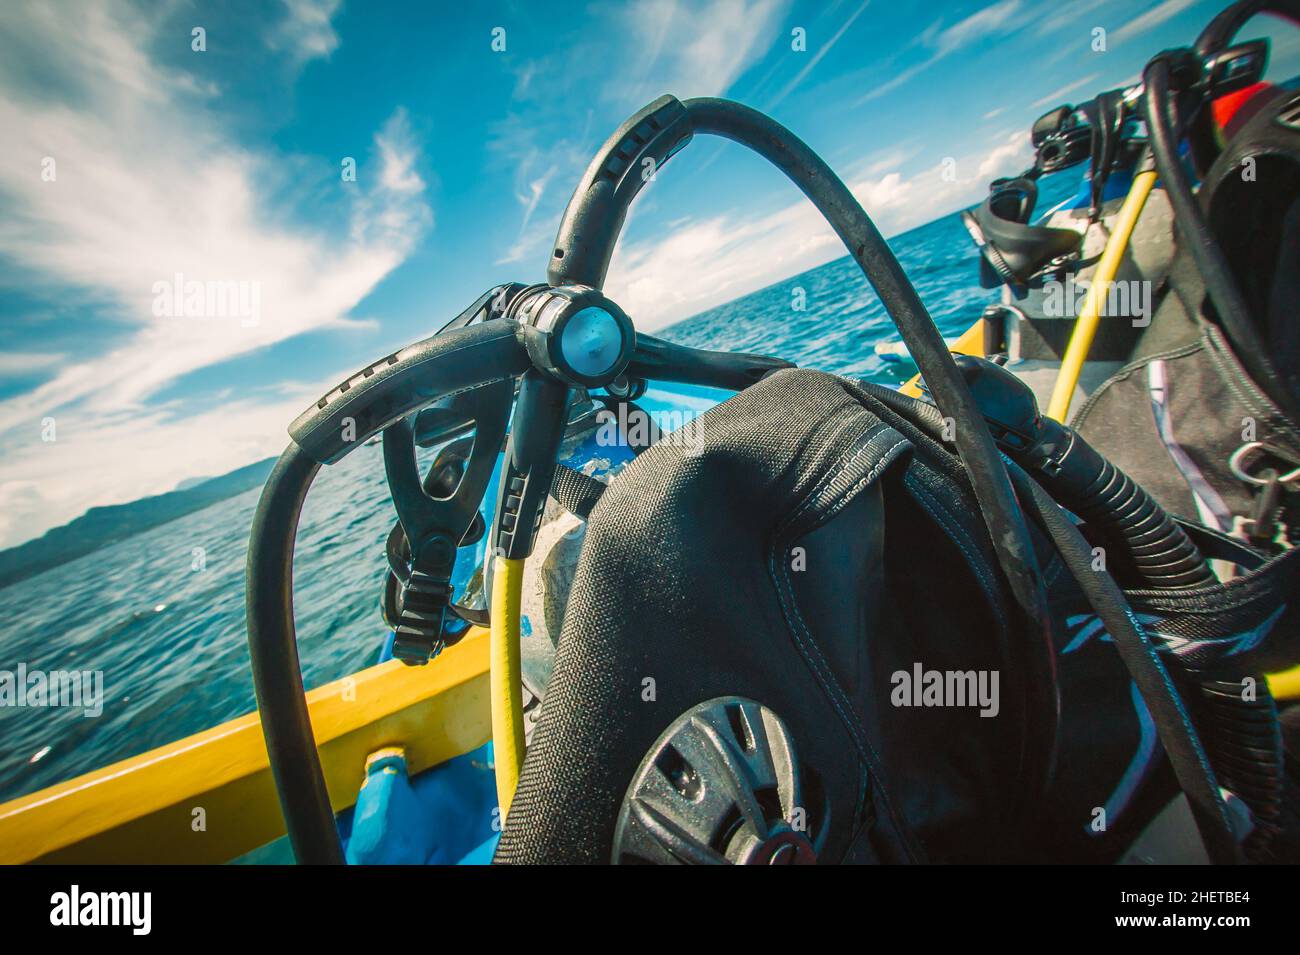 Scuba diving kit set on the boat, ready for dive. Diving equipment Stock Photo